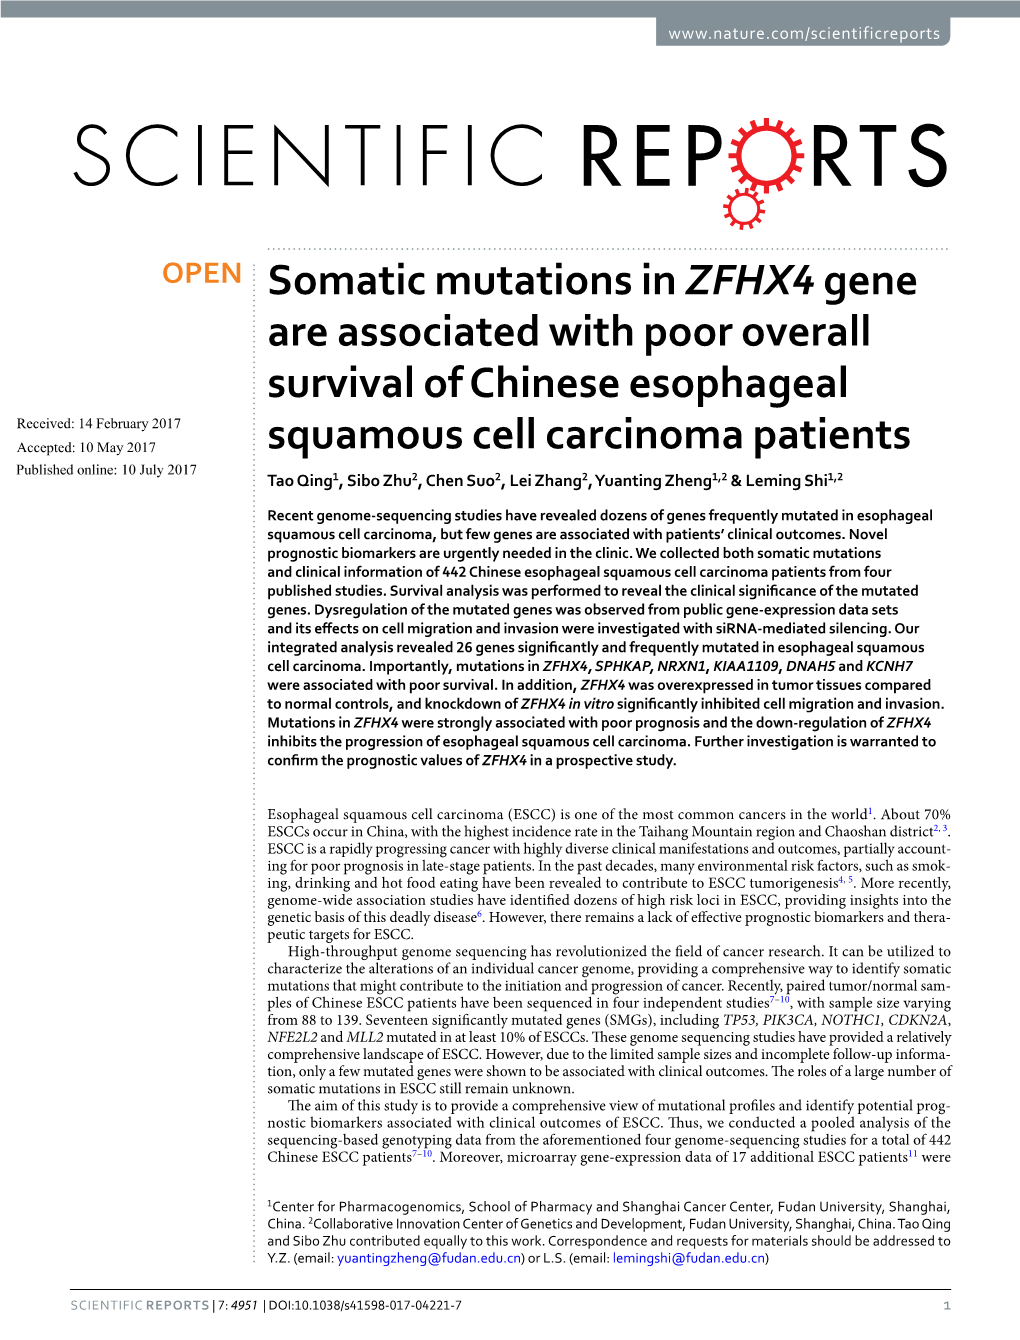 Somatic Mutations in ZFHX4 Gene Are Associated with Poor Overall Survival of Chinese Esophageal Squamous Cell Carcinoma Patients